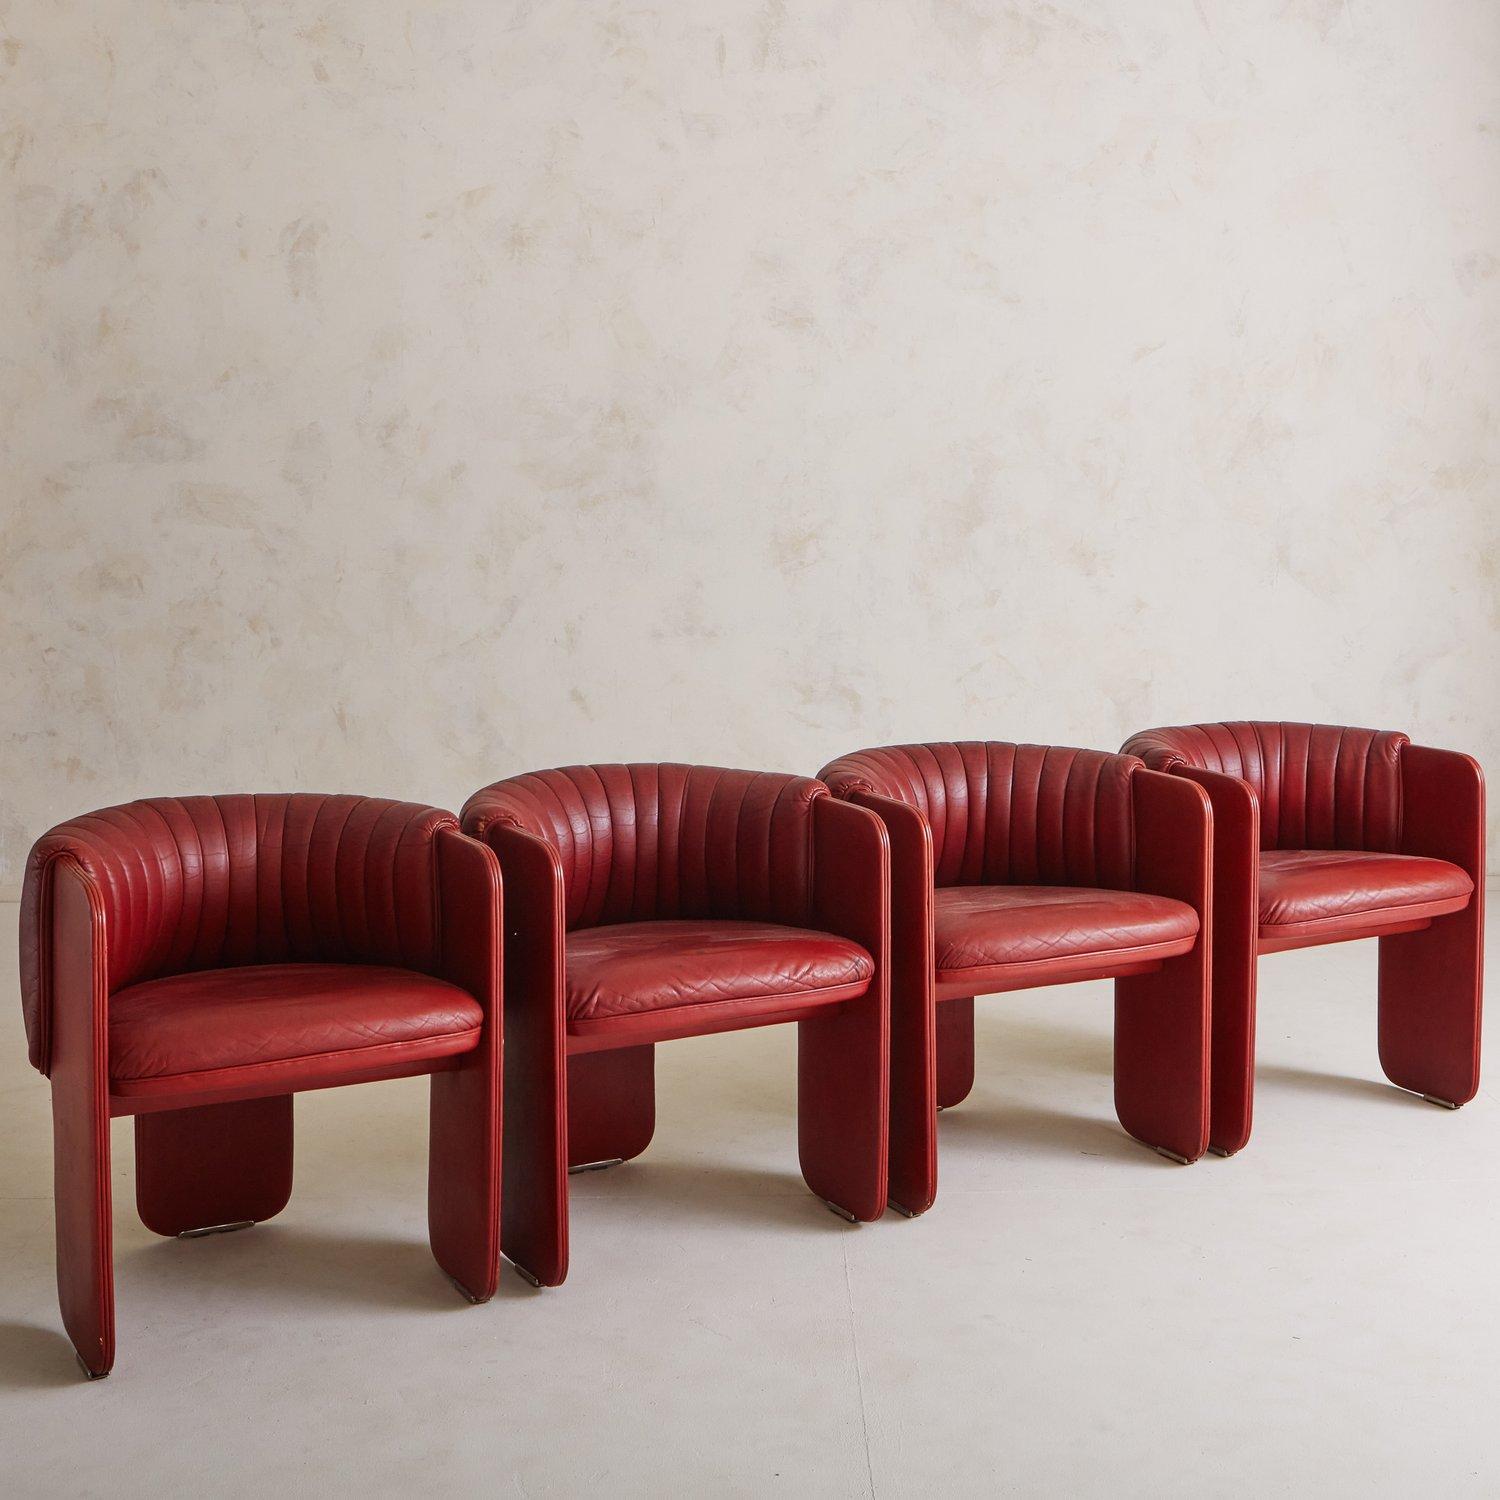 A set of 4 red vegan leather accent chairs by Luigi Massoni for Poltrona Frau, Italy 1980s. These rare three-legged chairs feature elegant curvature and make the most of negative space, offering a remarkable perspective from every angle. We love the